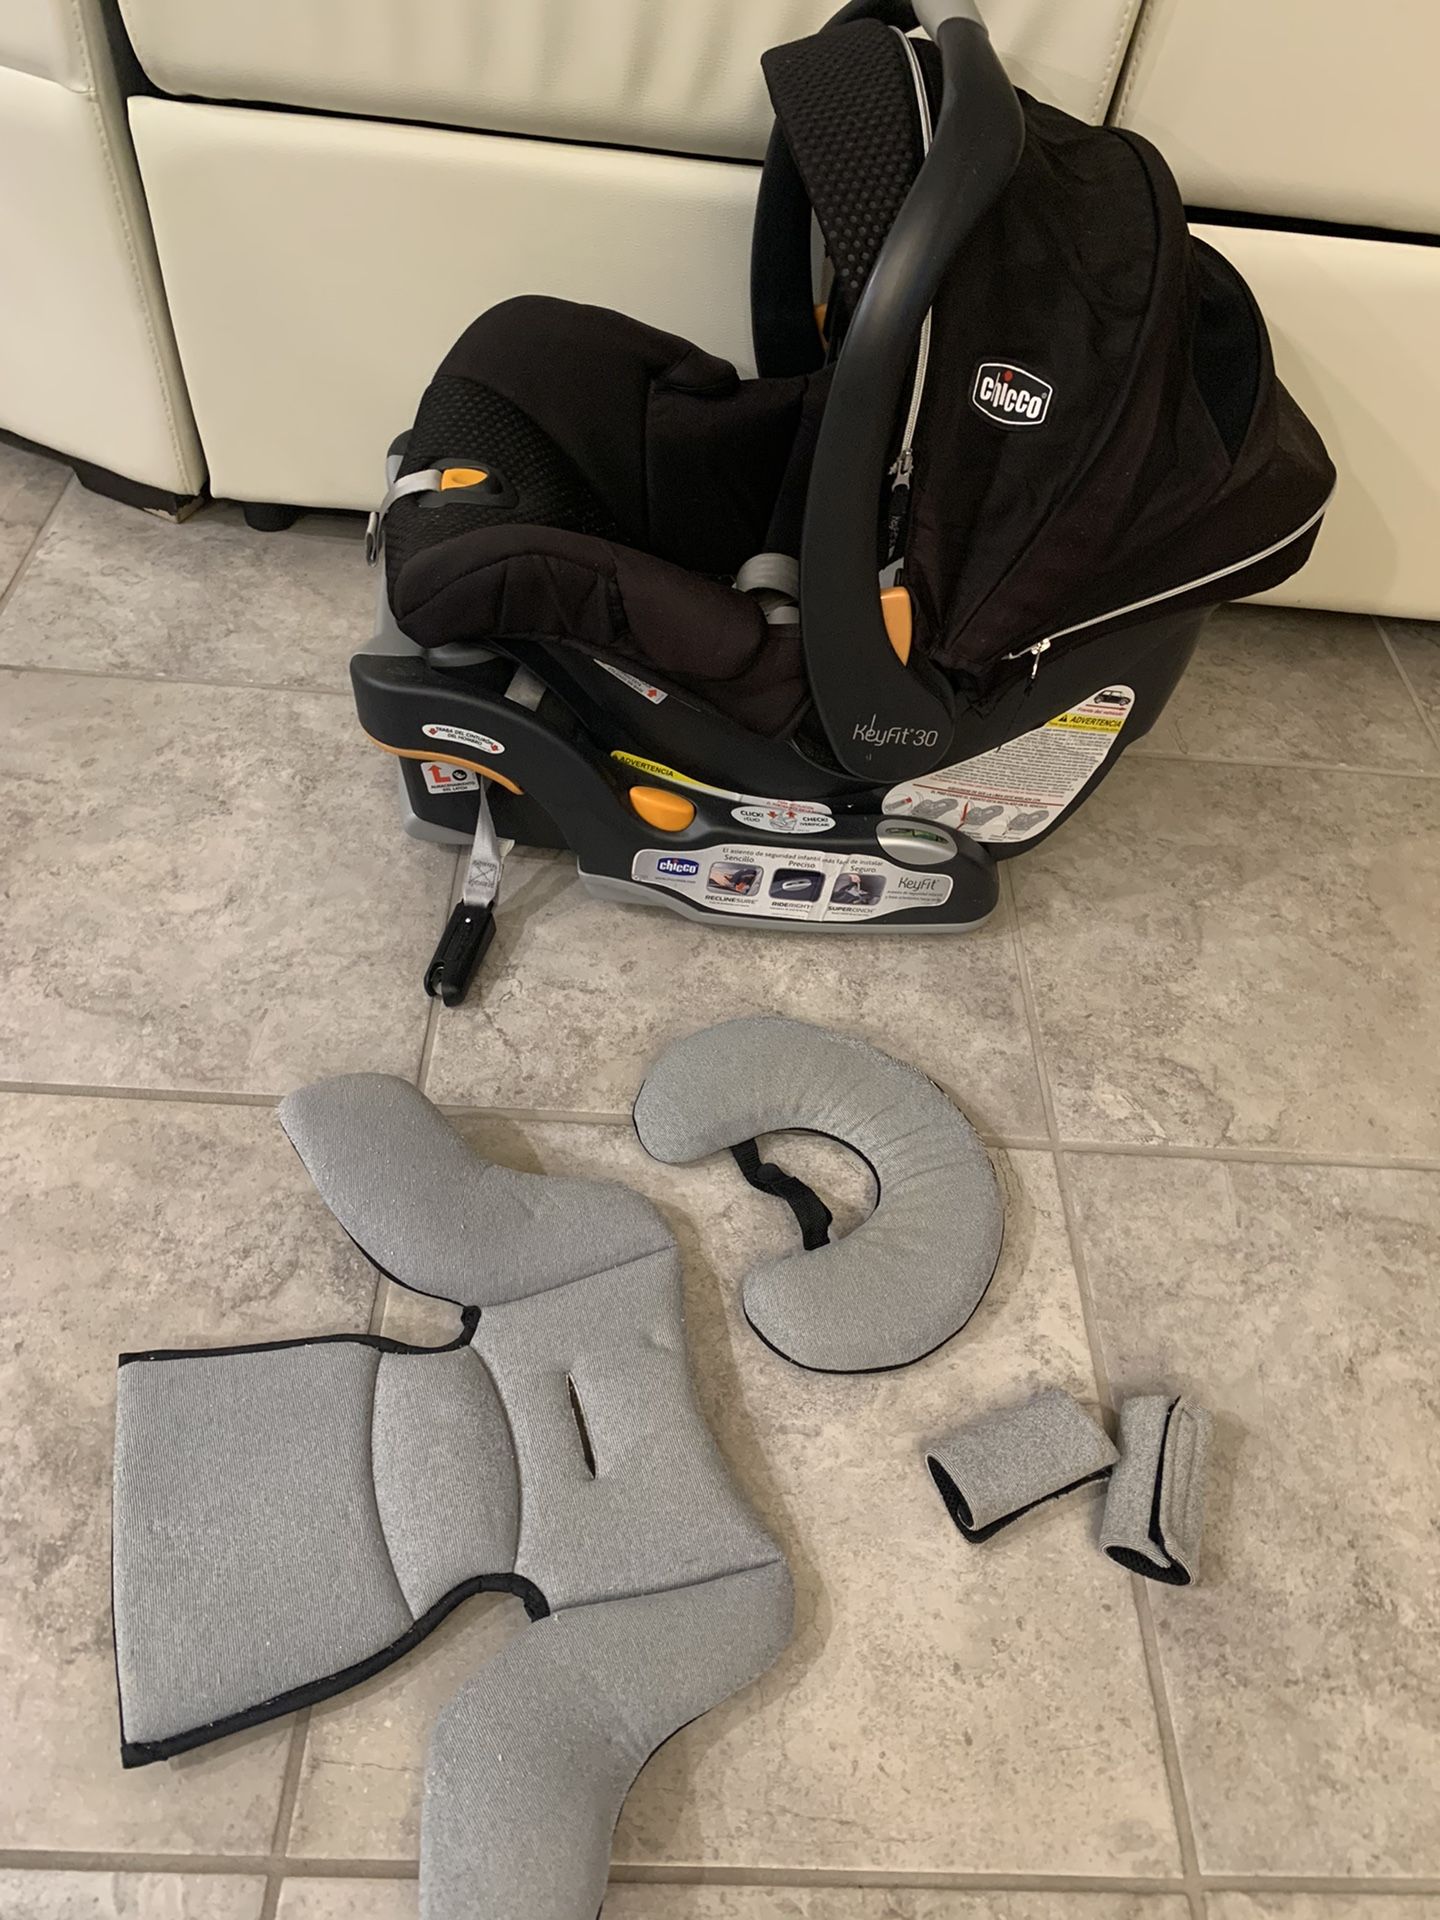 Keyfit 30 Chicco Carseat